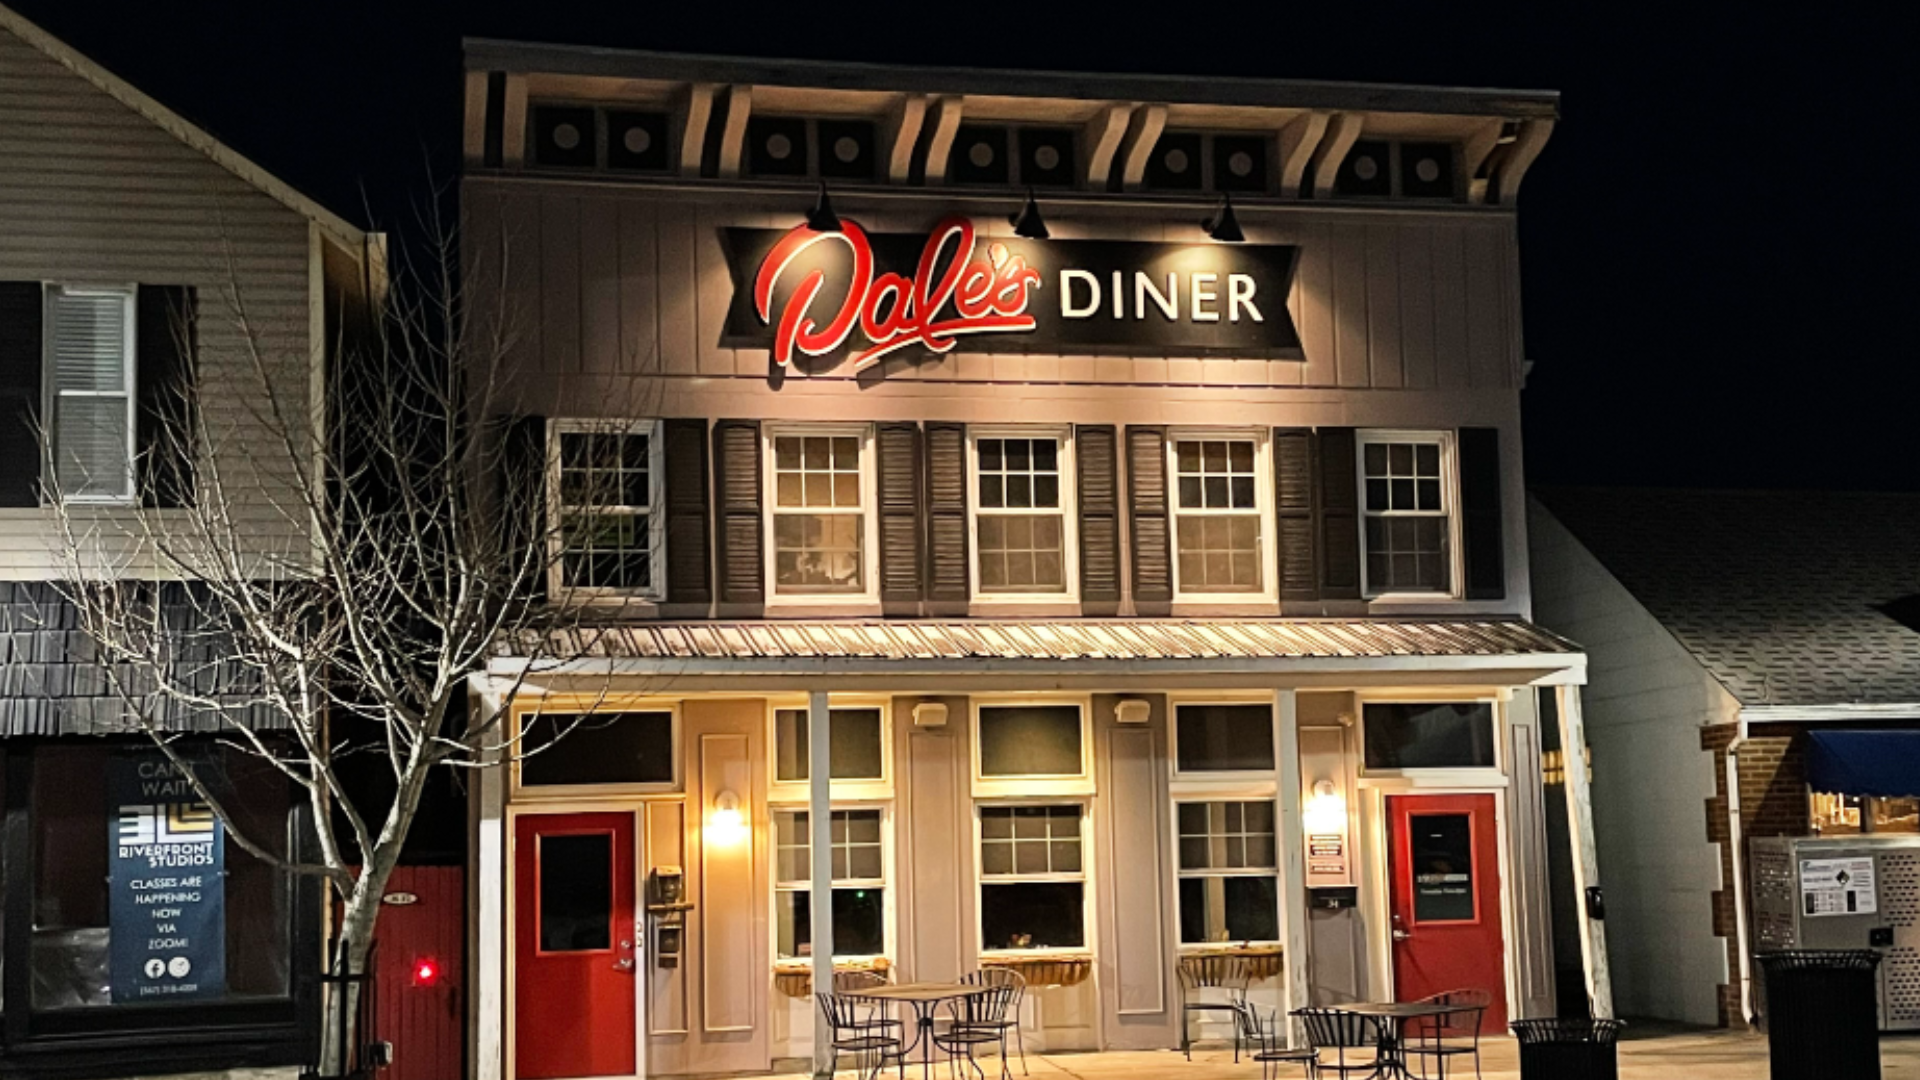 "We are not alone, the challenges of hiring is a pandemic in the restaurant industry," writes Dale's Diner owner Bill Anderson.